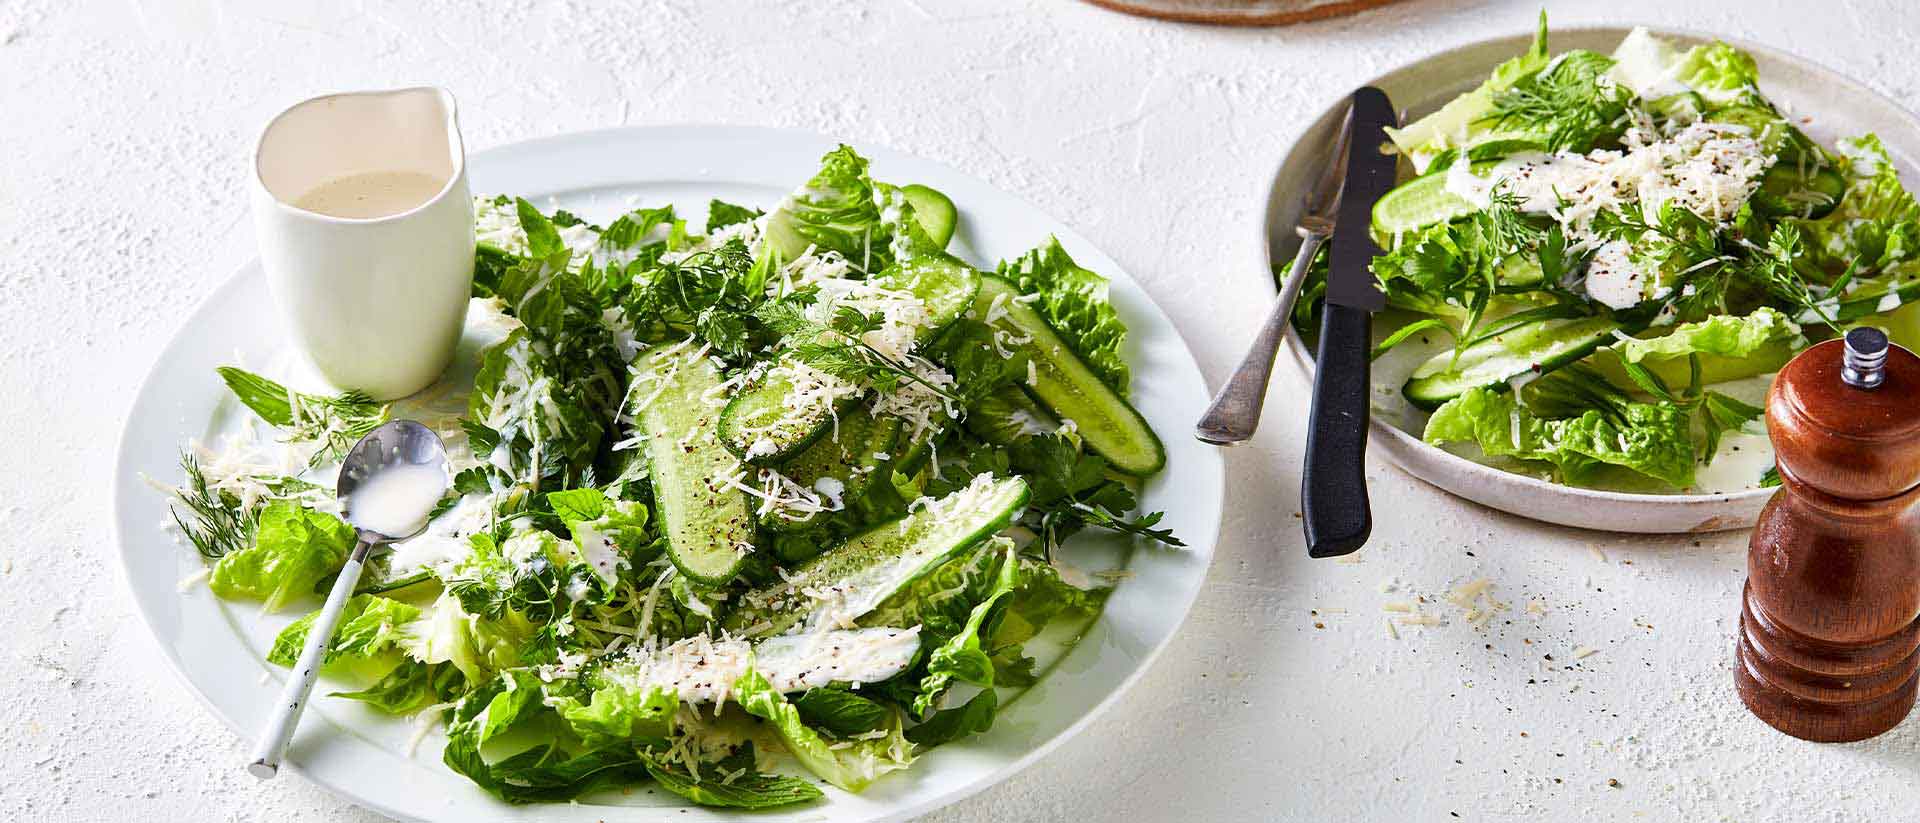 Qukes, Cos and Parmesan Salad with Buttermilk Dressing Recipe 